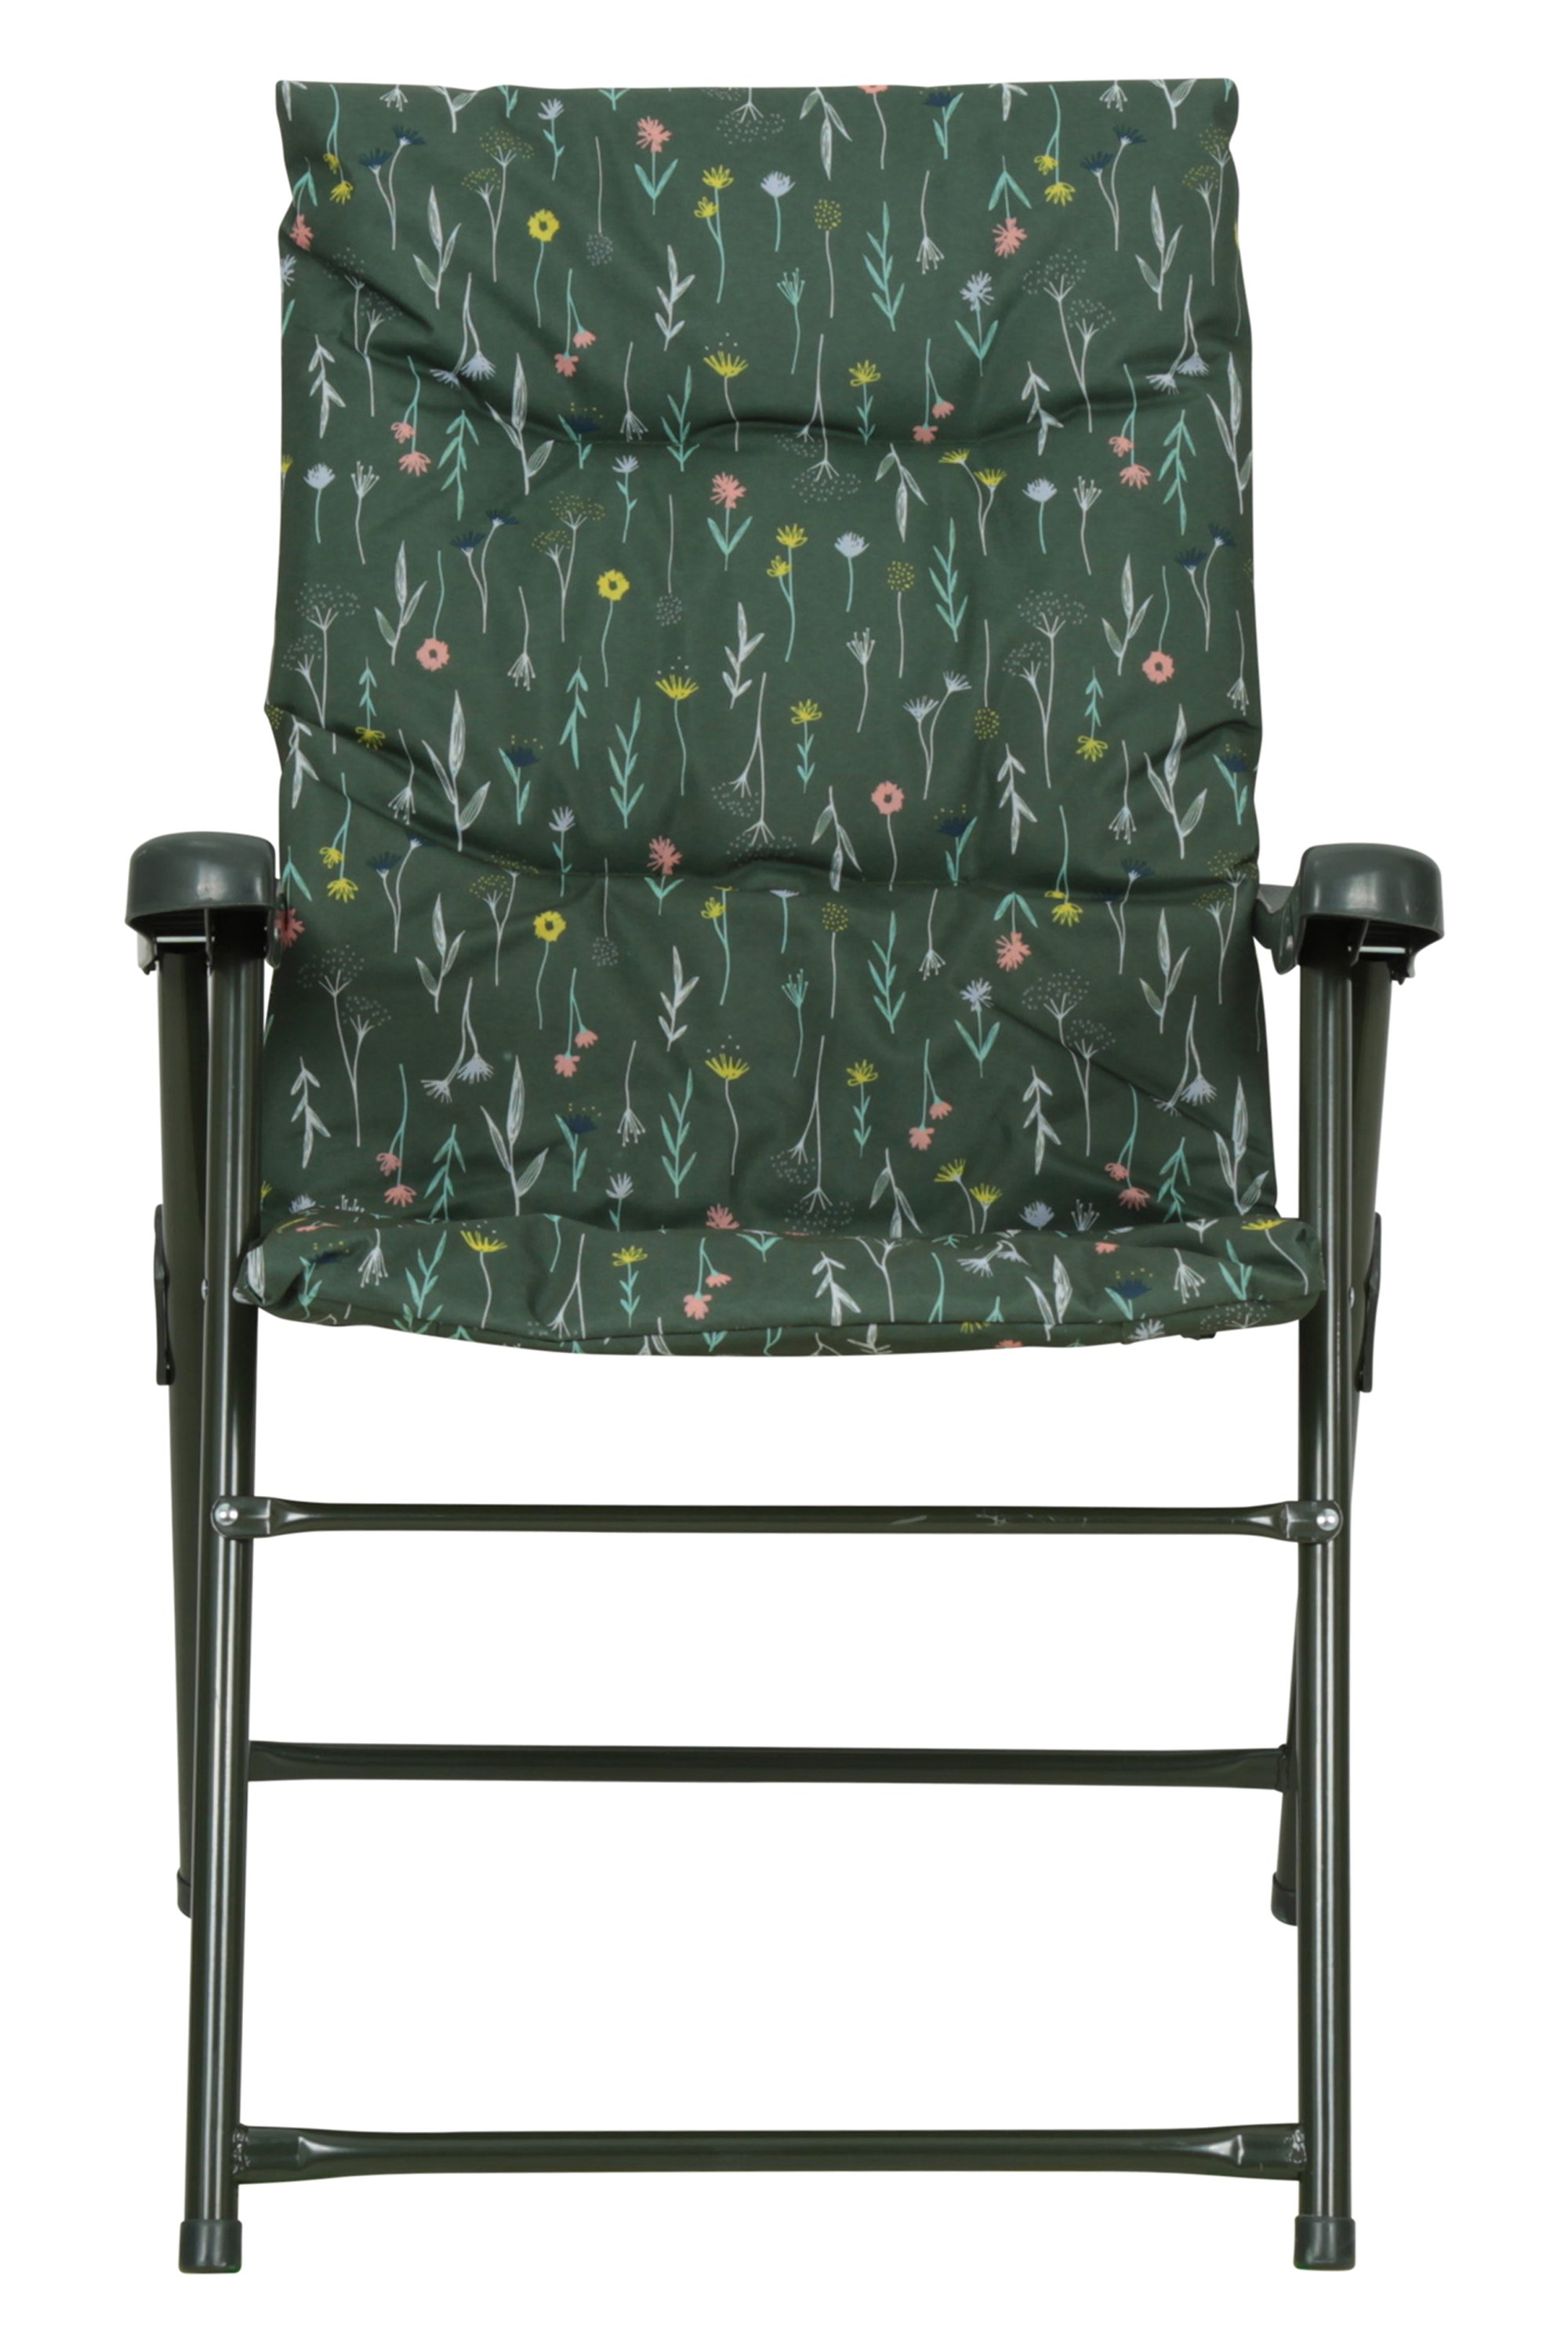 mountain warehouse camping chairs